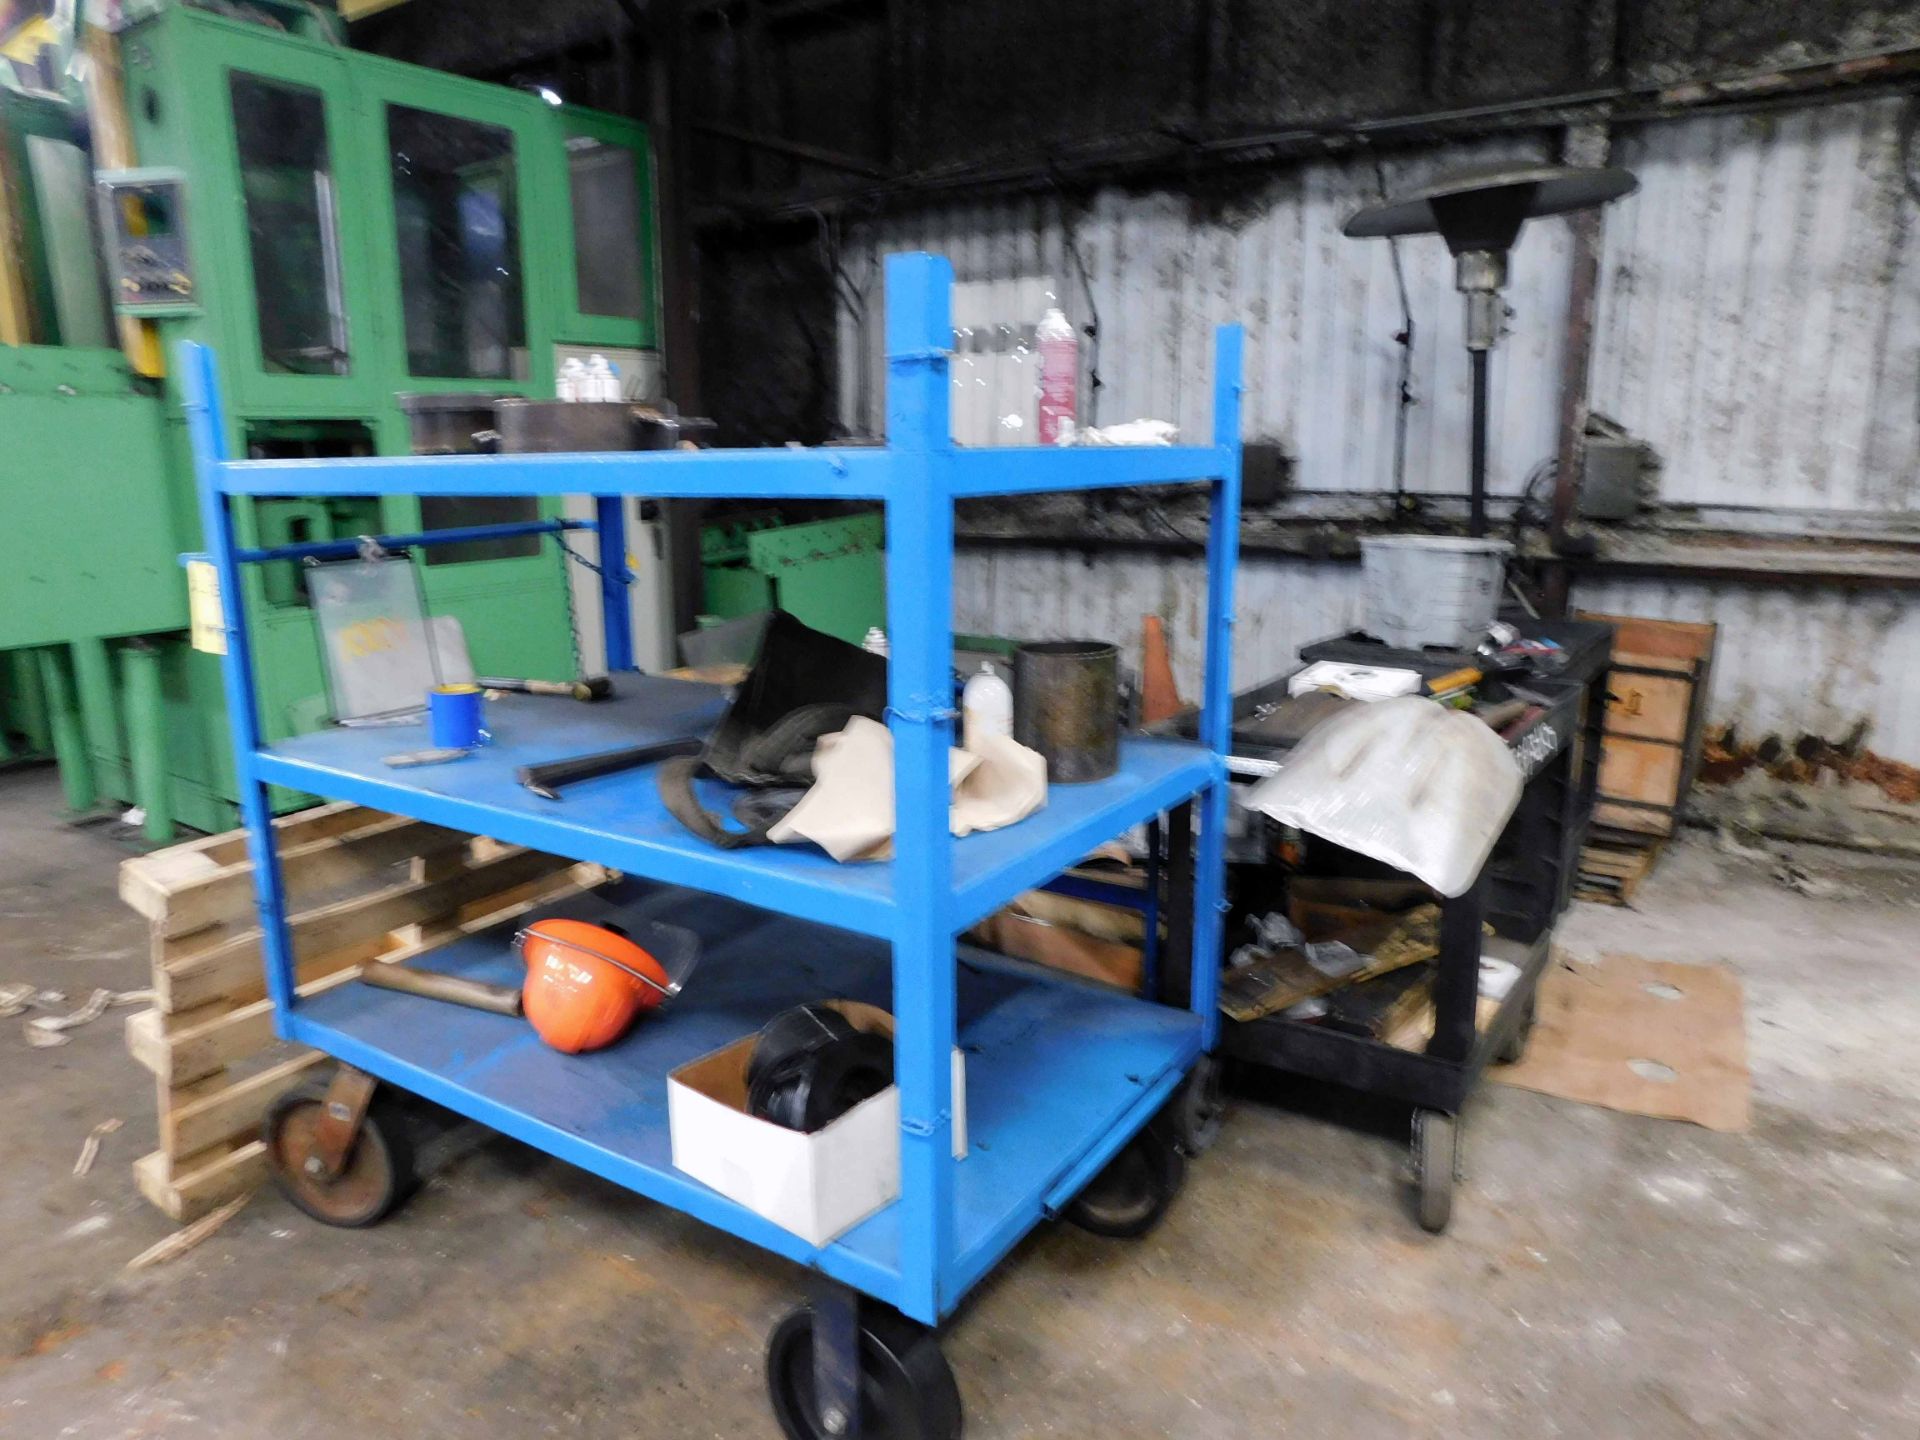 LOT CONSISTING OF: (5) roller shop carts & propane patio heater